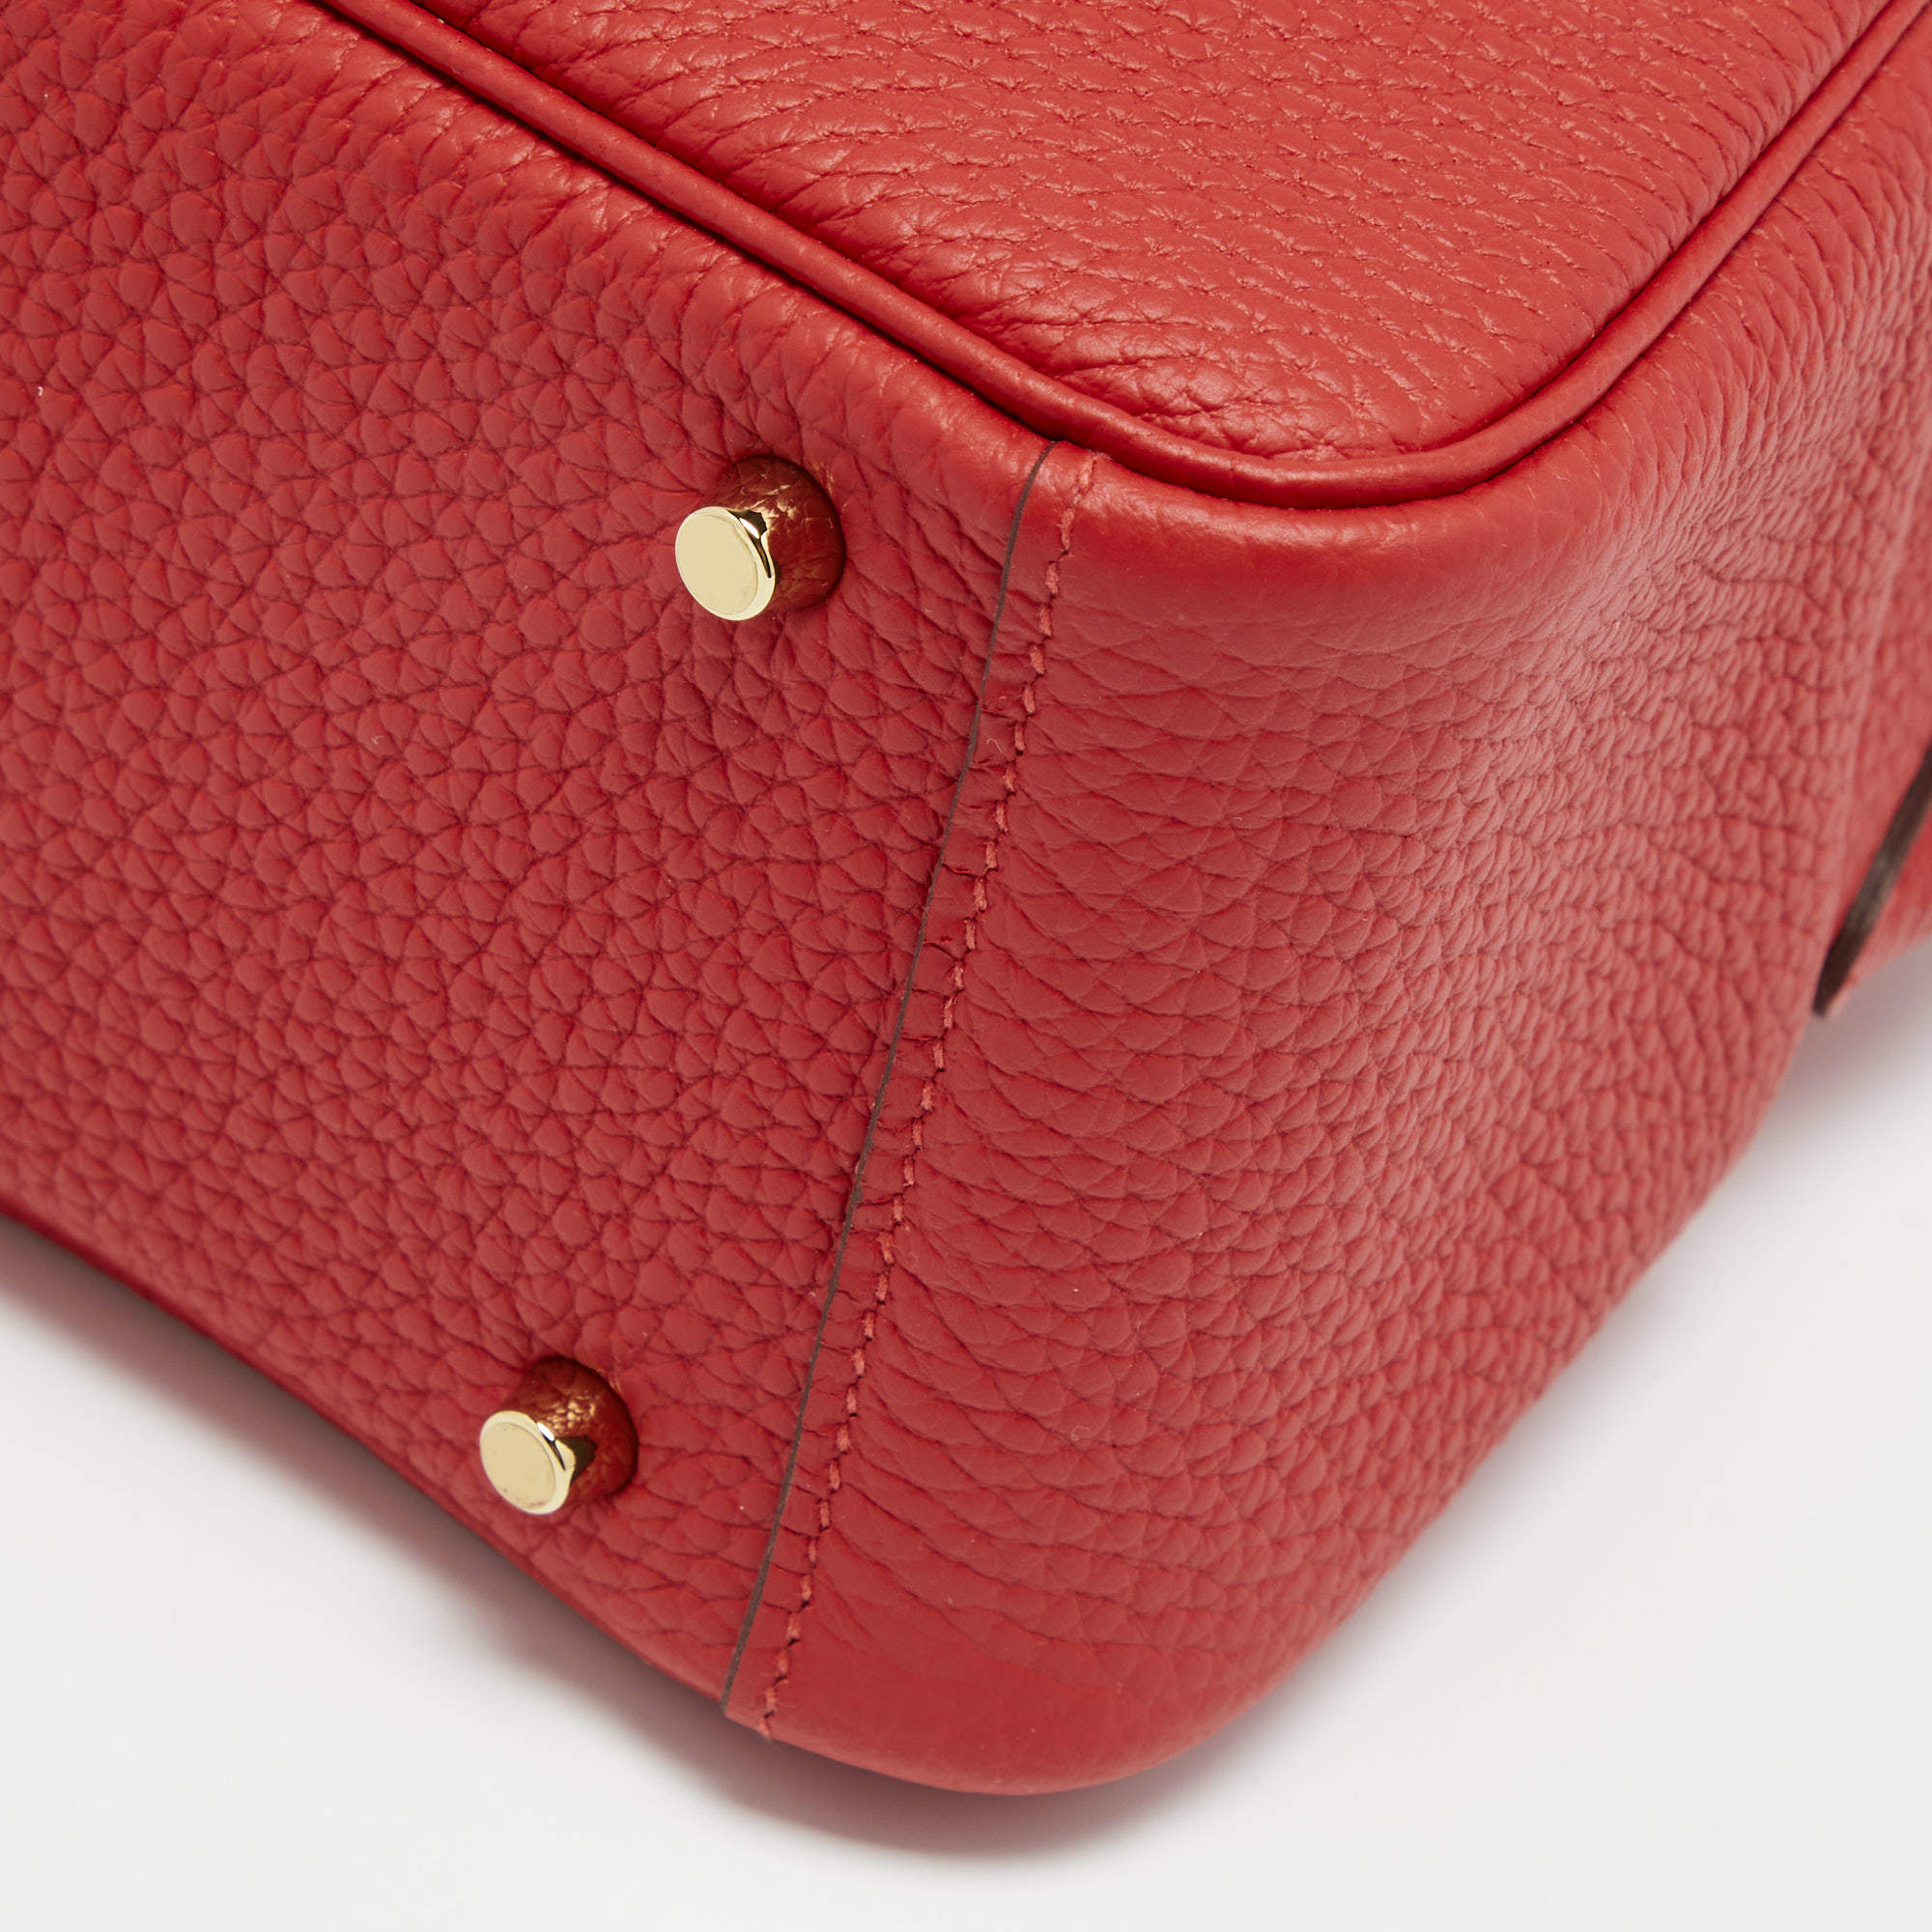 Hermès 20cm Rouge Tomate Clemence Leather Lindy Bag with Gold